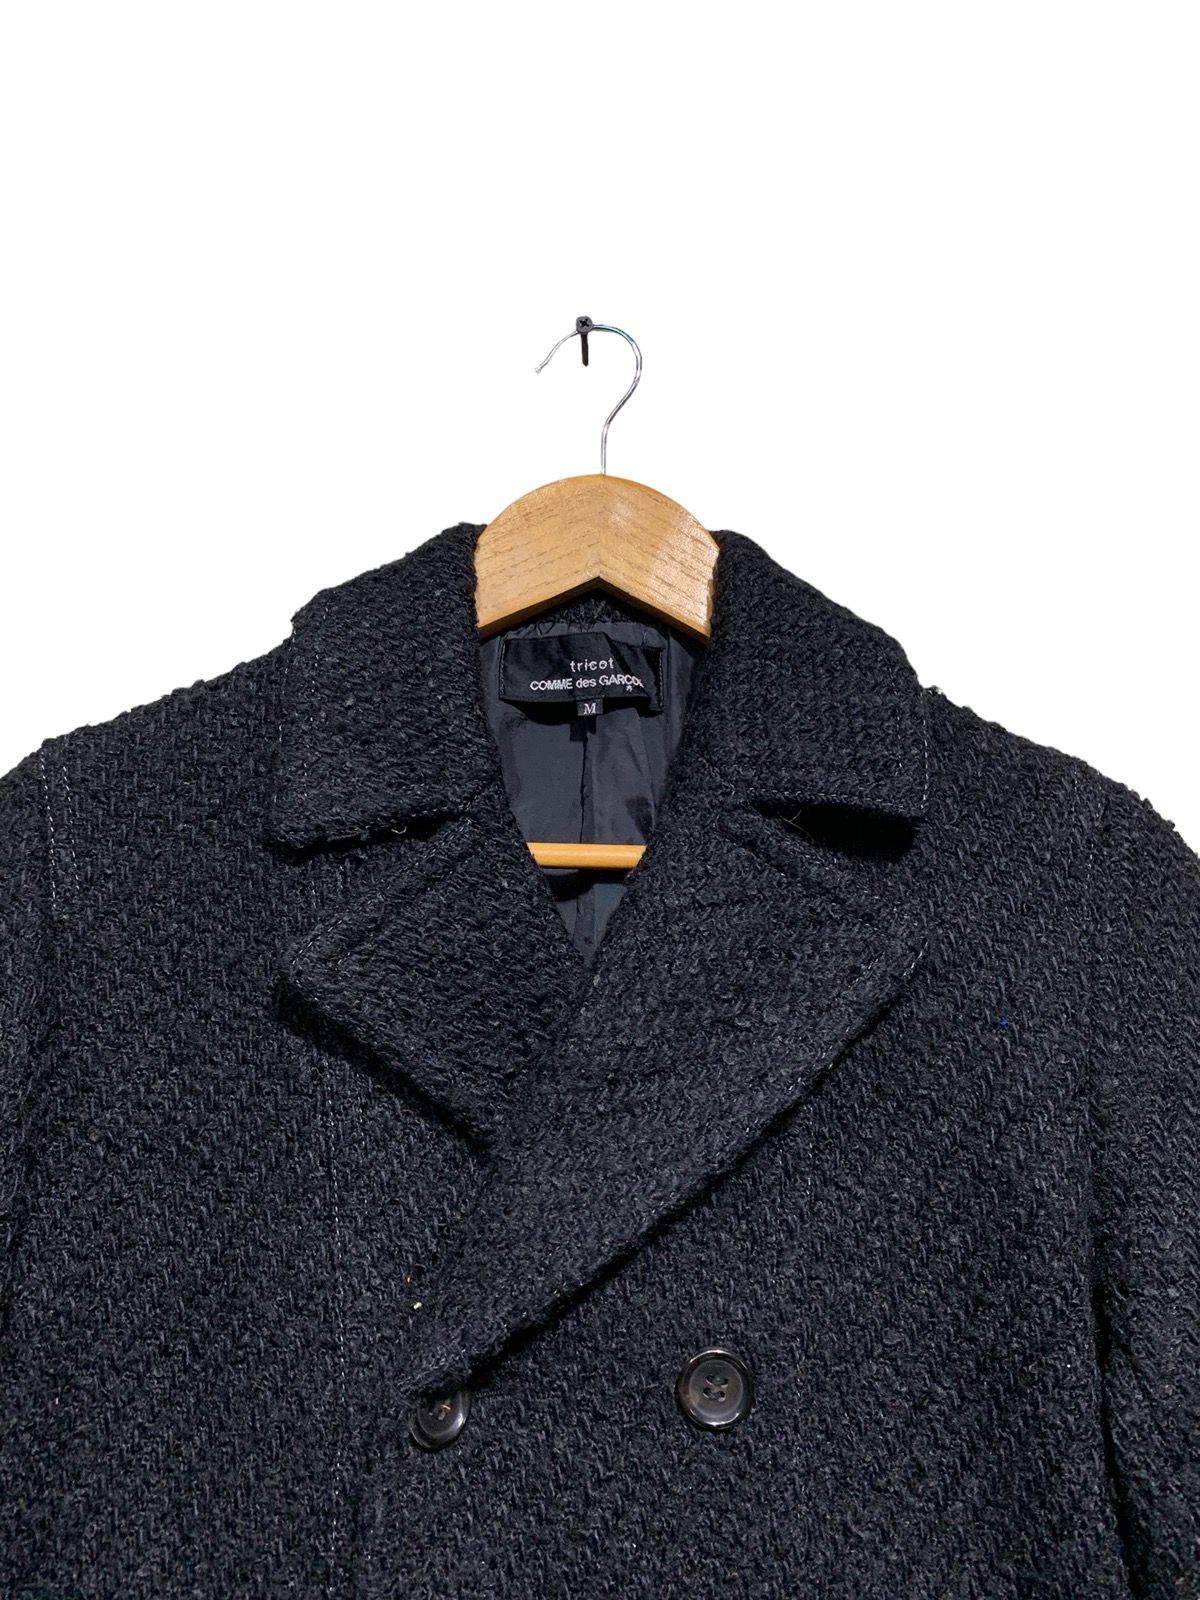 🔥TRICOT CdG WOOL CABLE KNIT DOUBLE BREAST JACKETS - 4